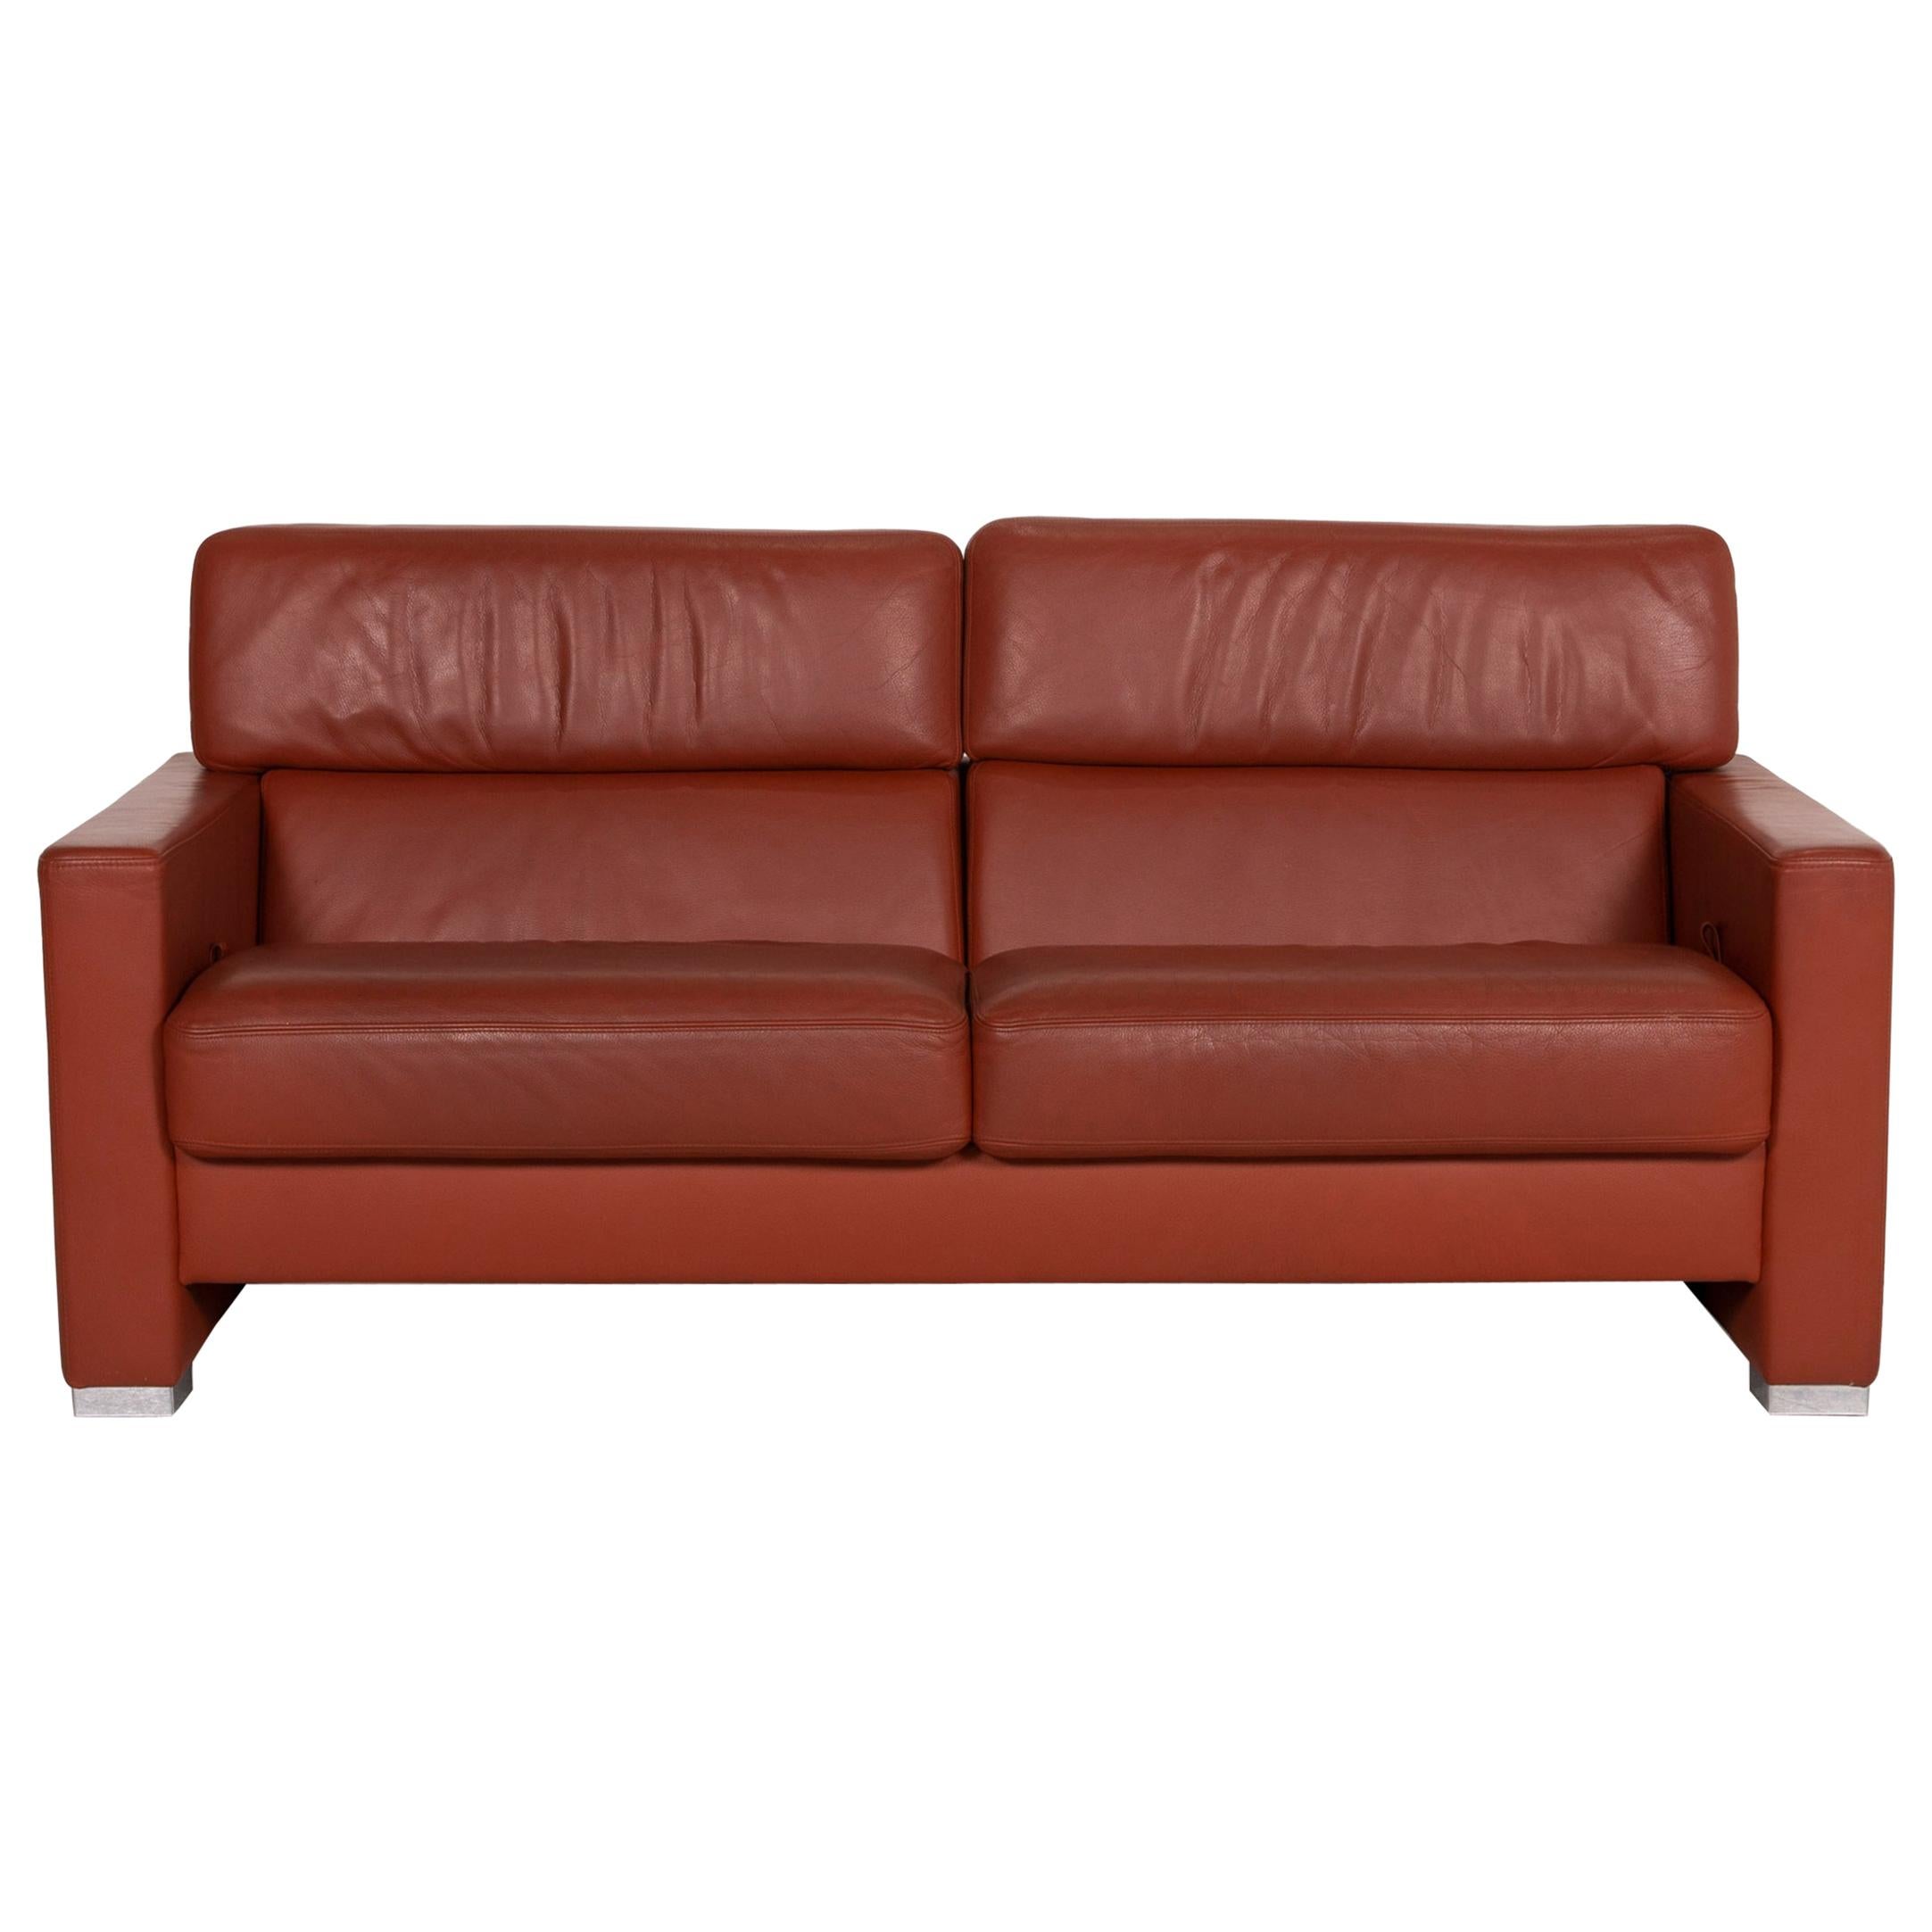 Brühl Collection Separe Leather Sofa Terracotta Three-Seater Function For Sale